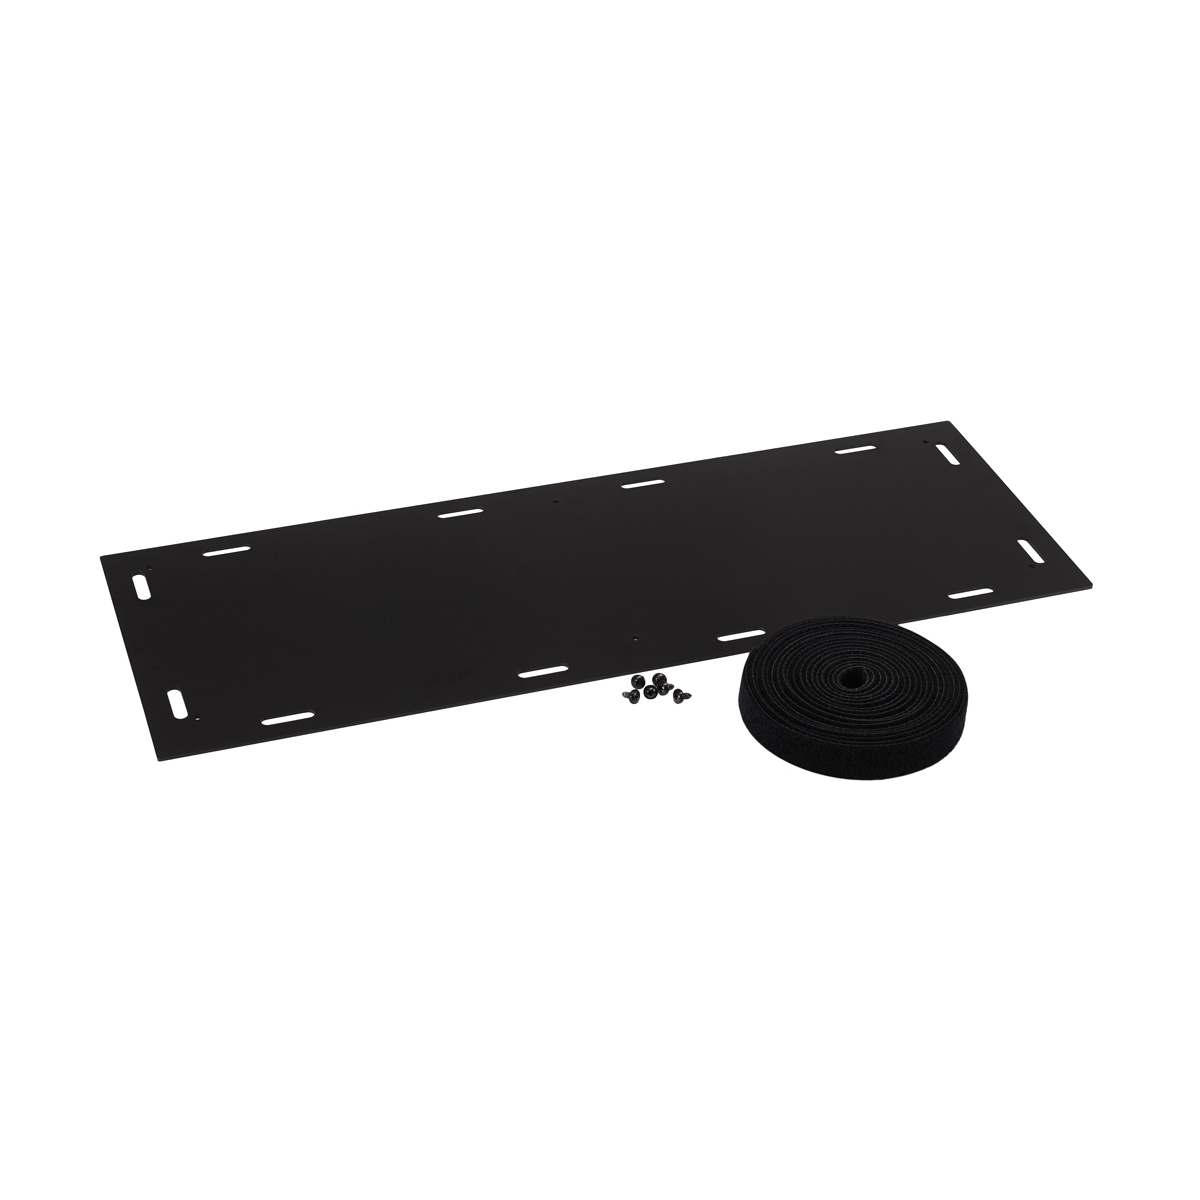 Systainer³ XXL mounting plate